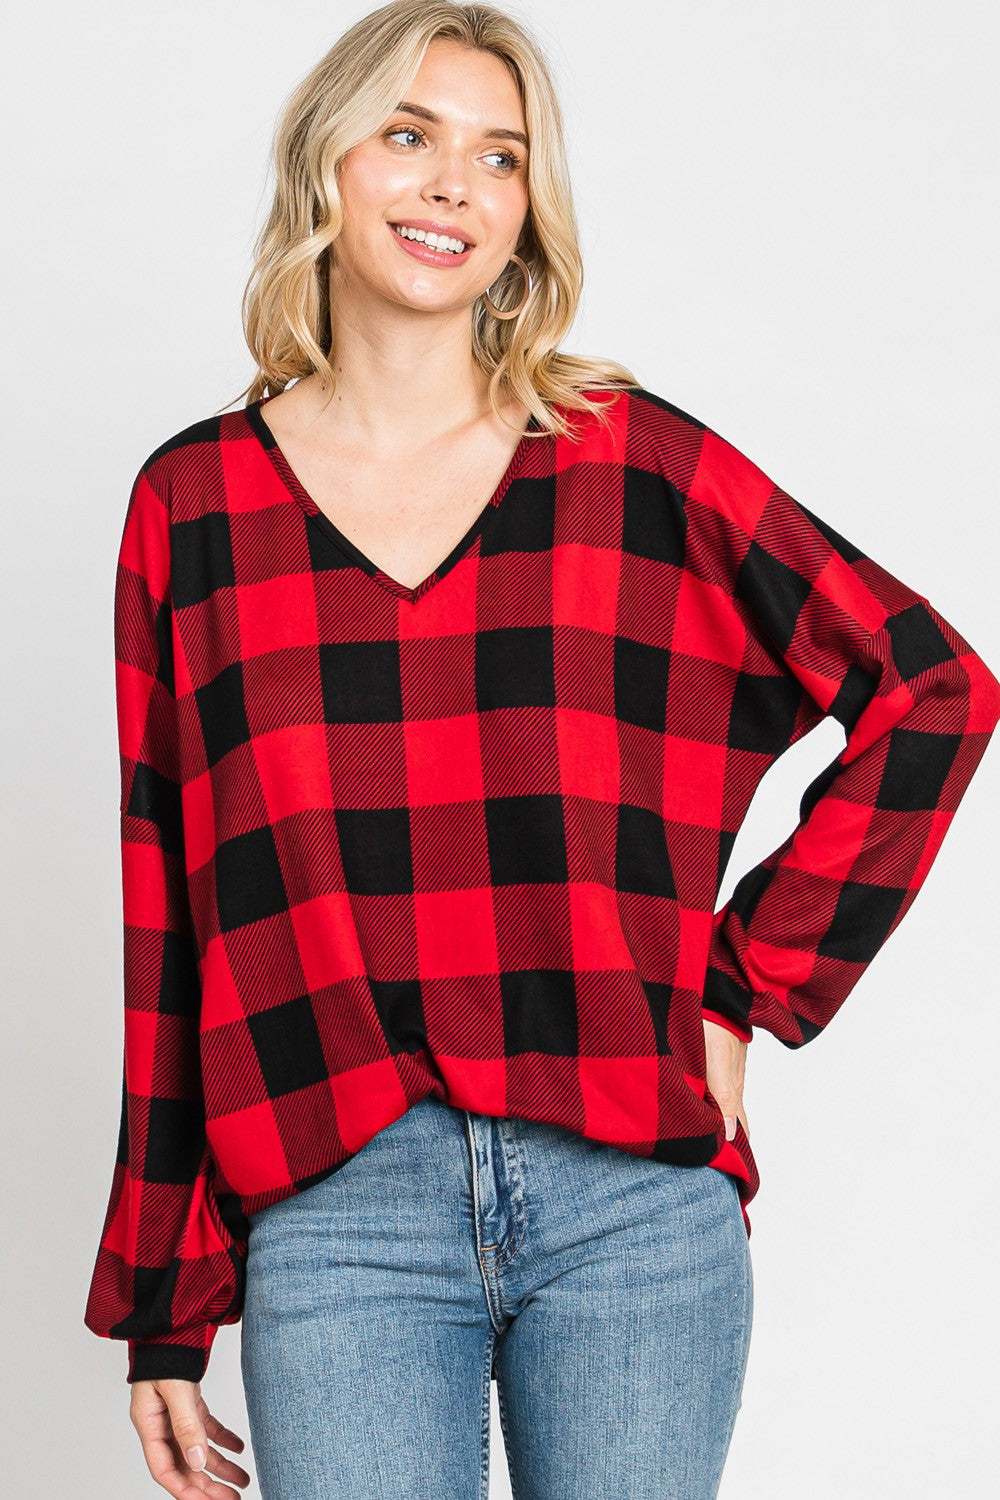 Already Checked Here Buffalo Plaid Top, Red/Black